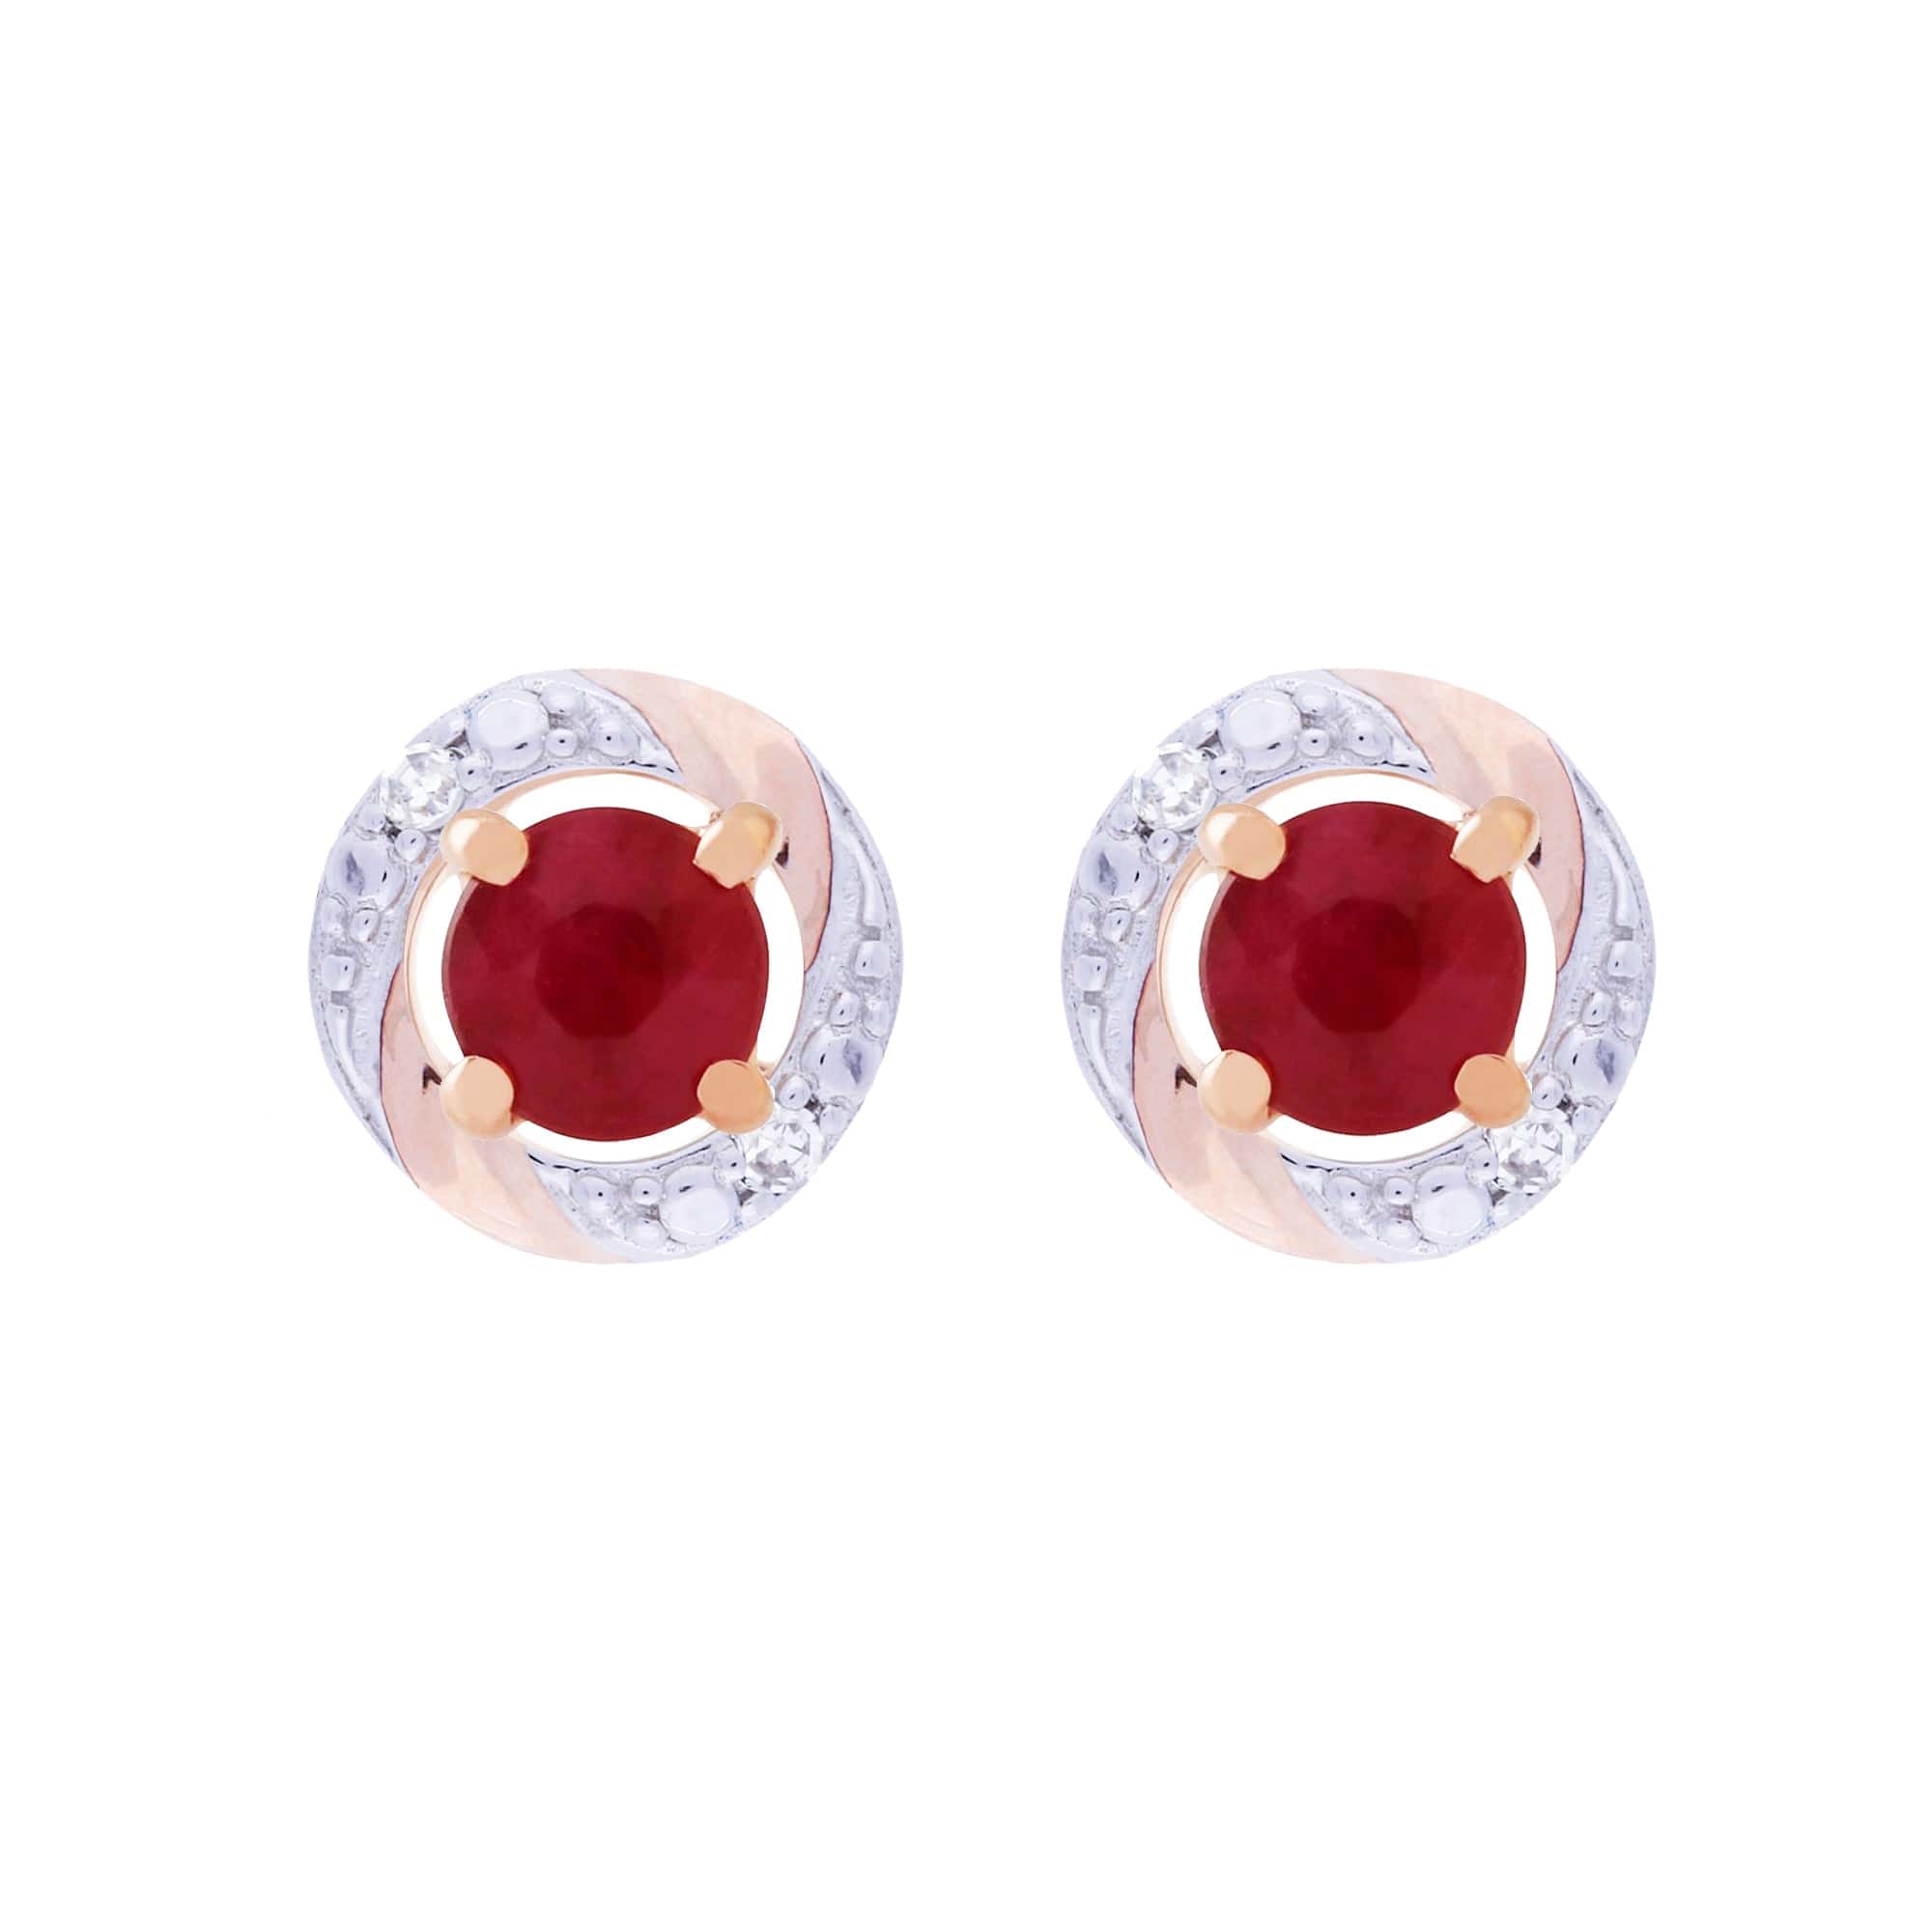 183E4316069-191E0378019 Classic Round Ruby Stud Earrings with Detachable Diamond Round Earrings Jacket Set in 9ct Rose Gold 1